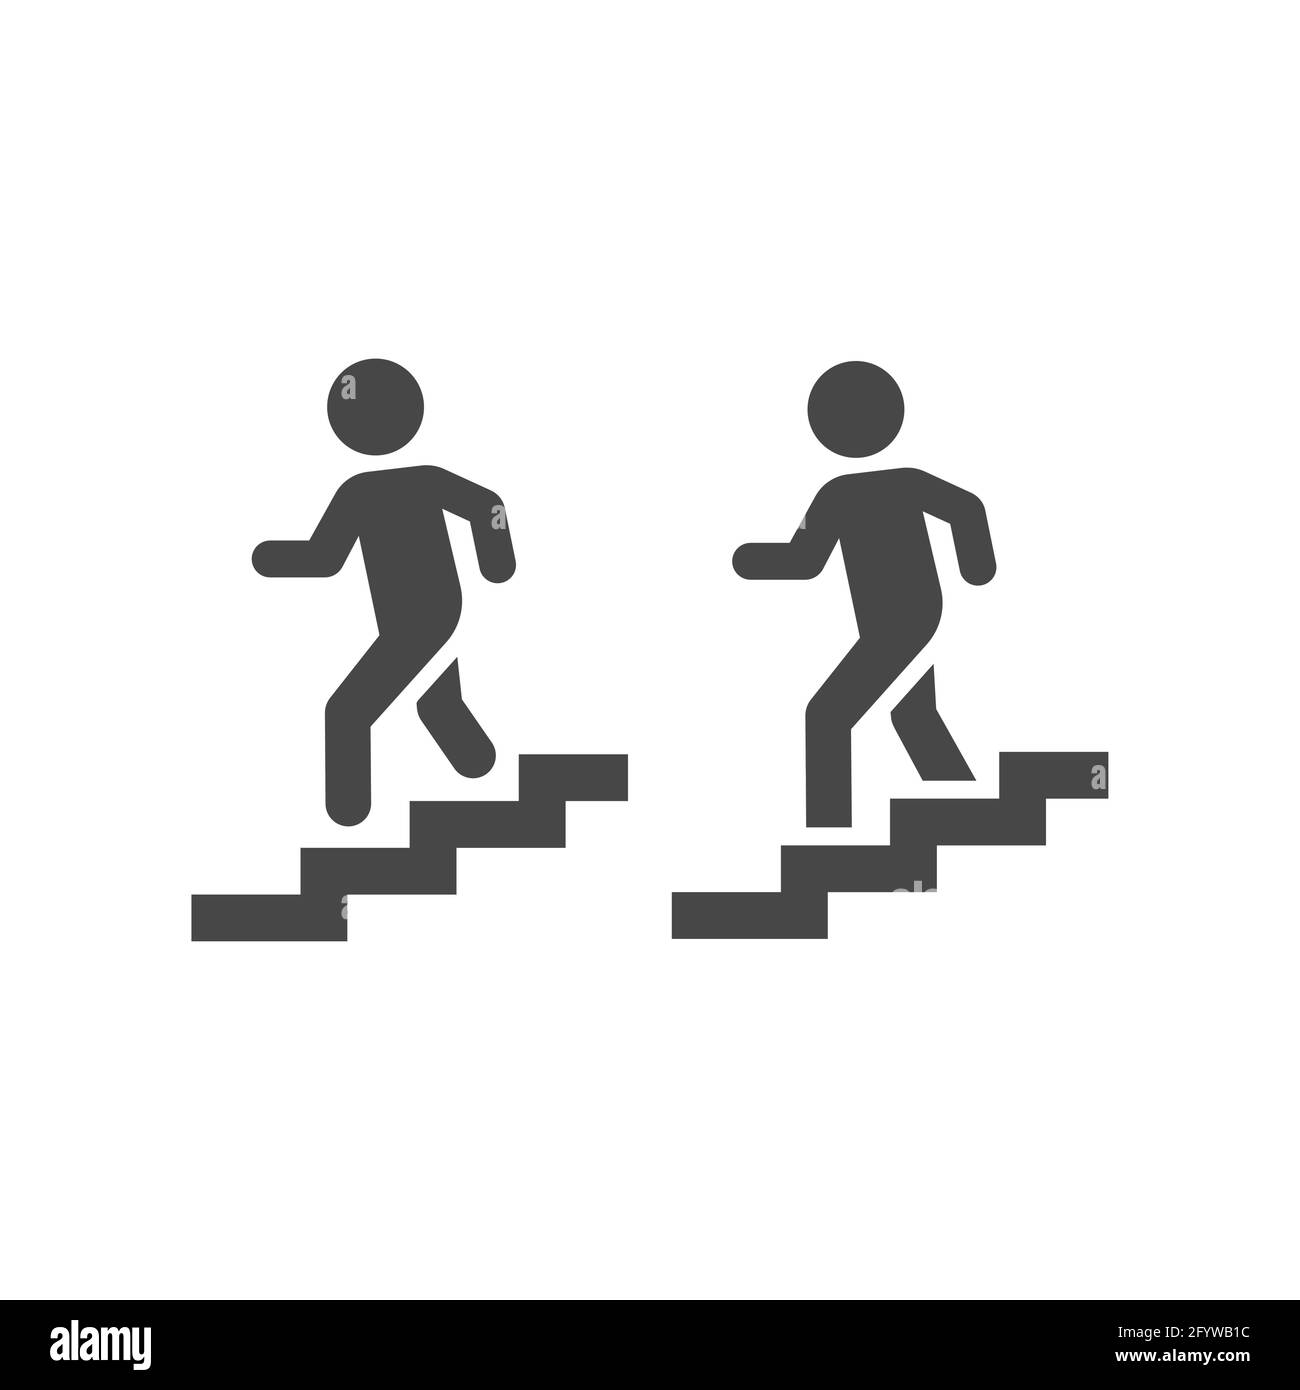 Man going down stairs vector icon. Staircase simple symbol. Stock Vector